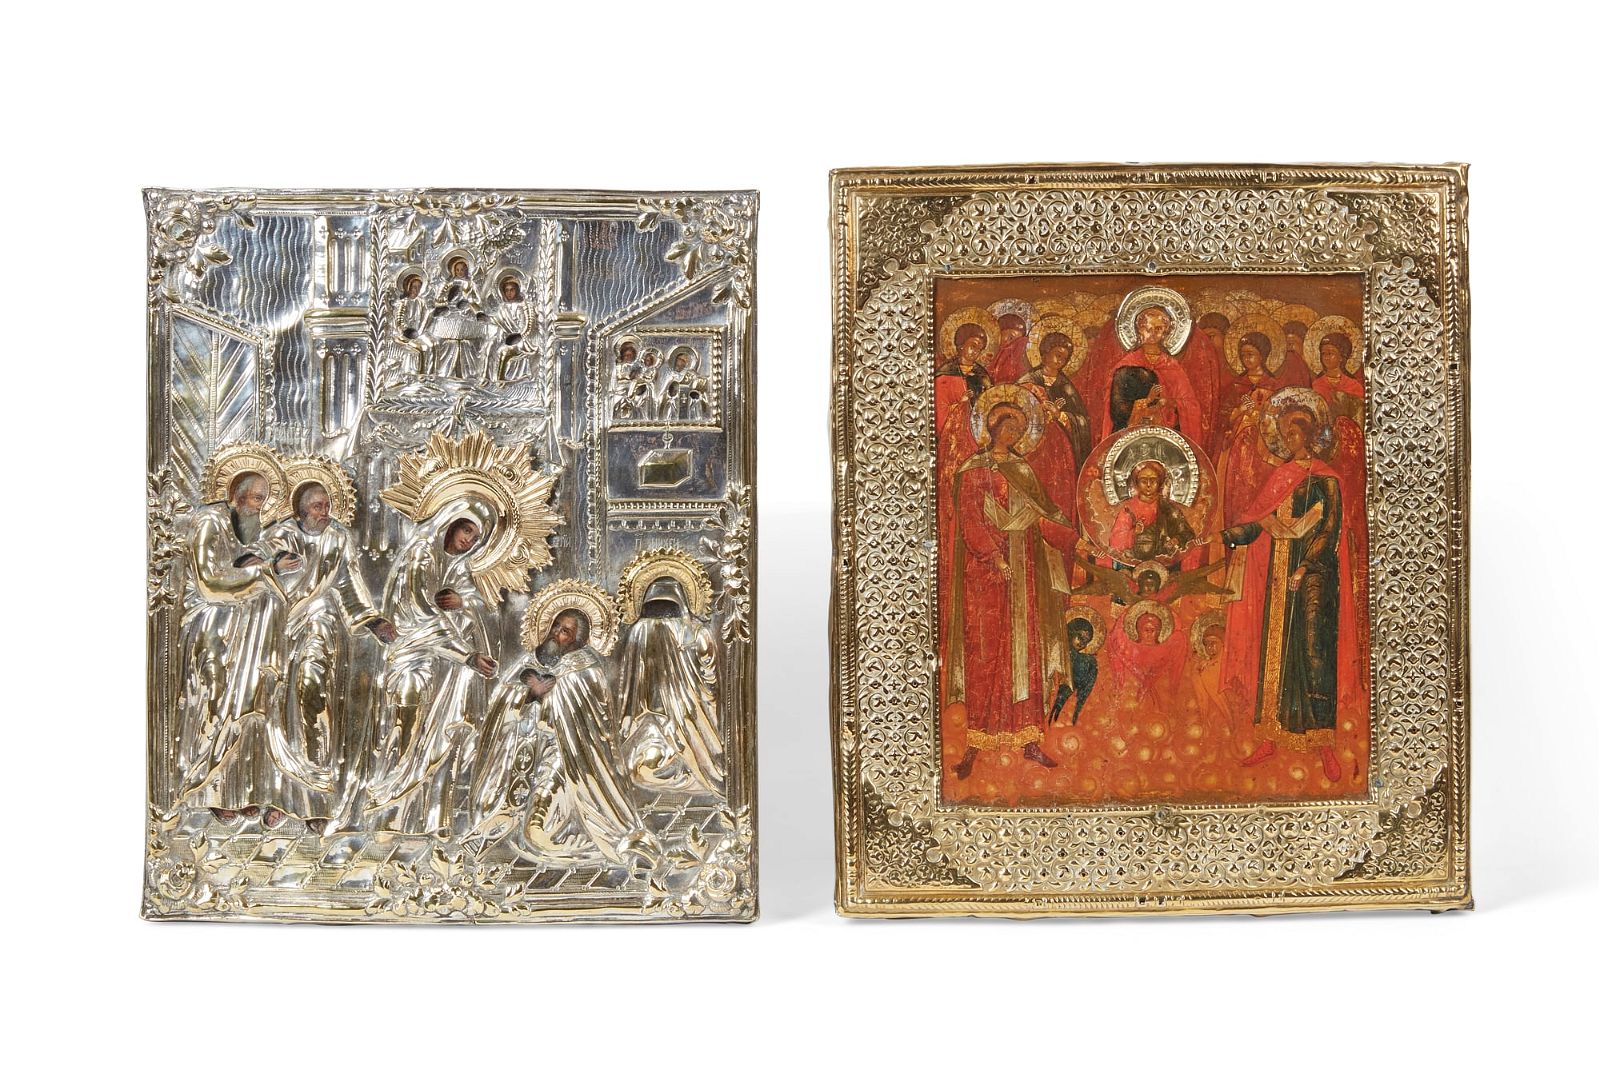 TWO RUSSIAN ICONS, 17TH-19TH CENTURYTwo